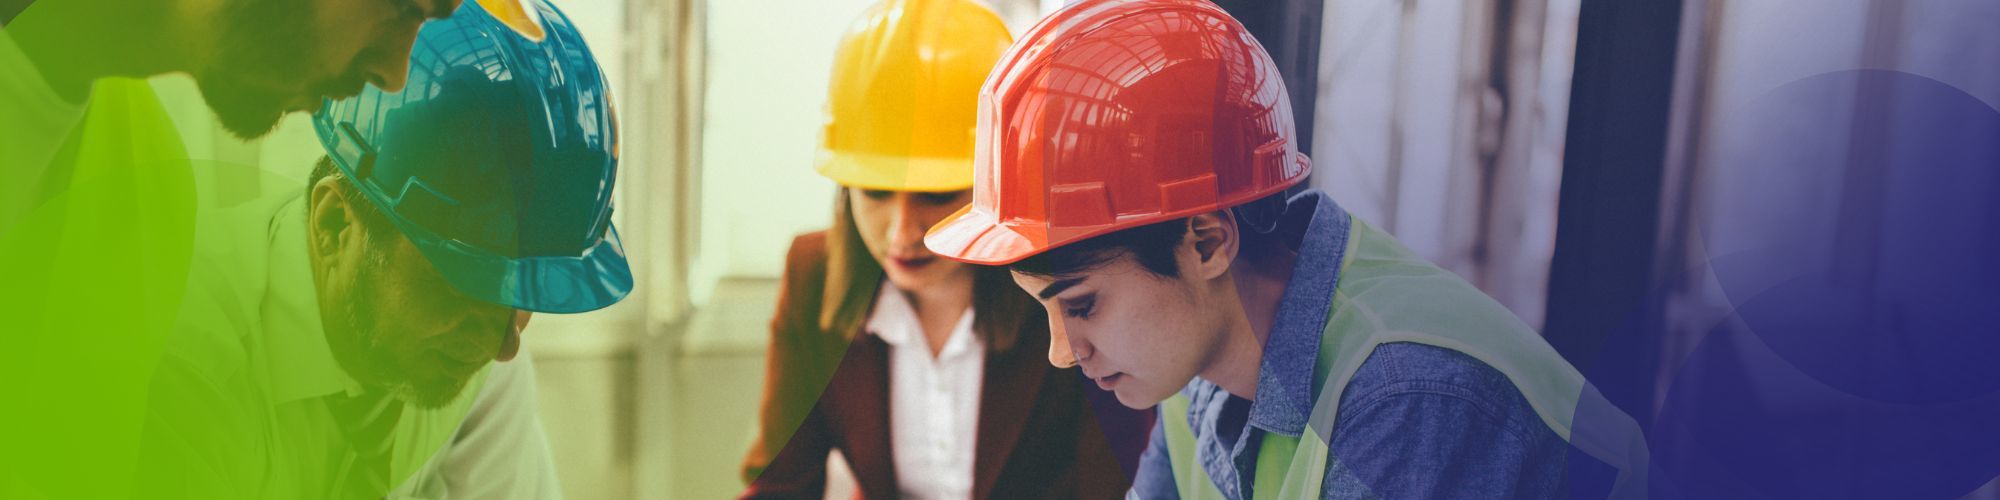 UK Construction Industry Faces Demand for 216,800 Workers by 2025, Shows CITB Report